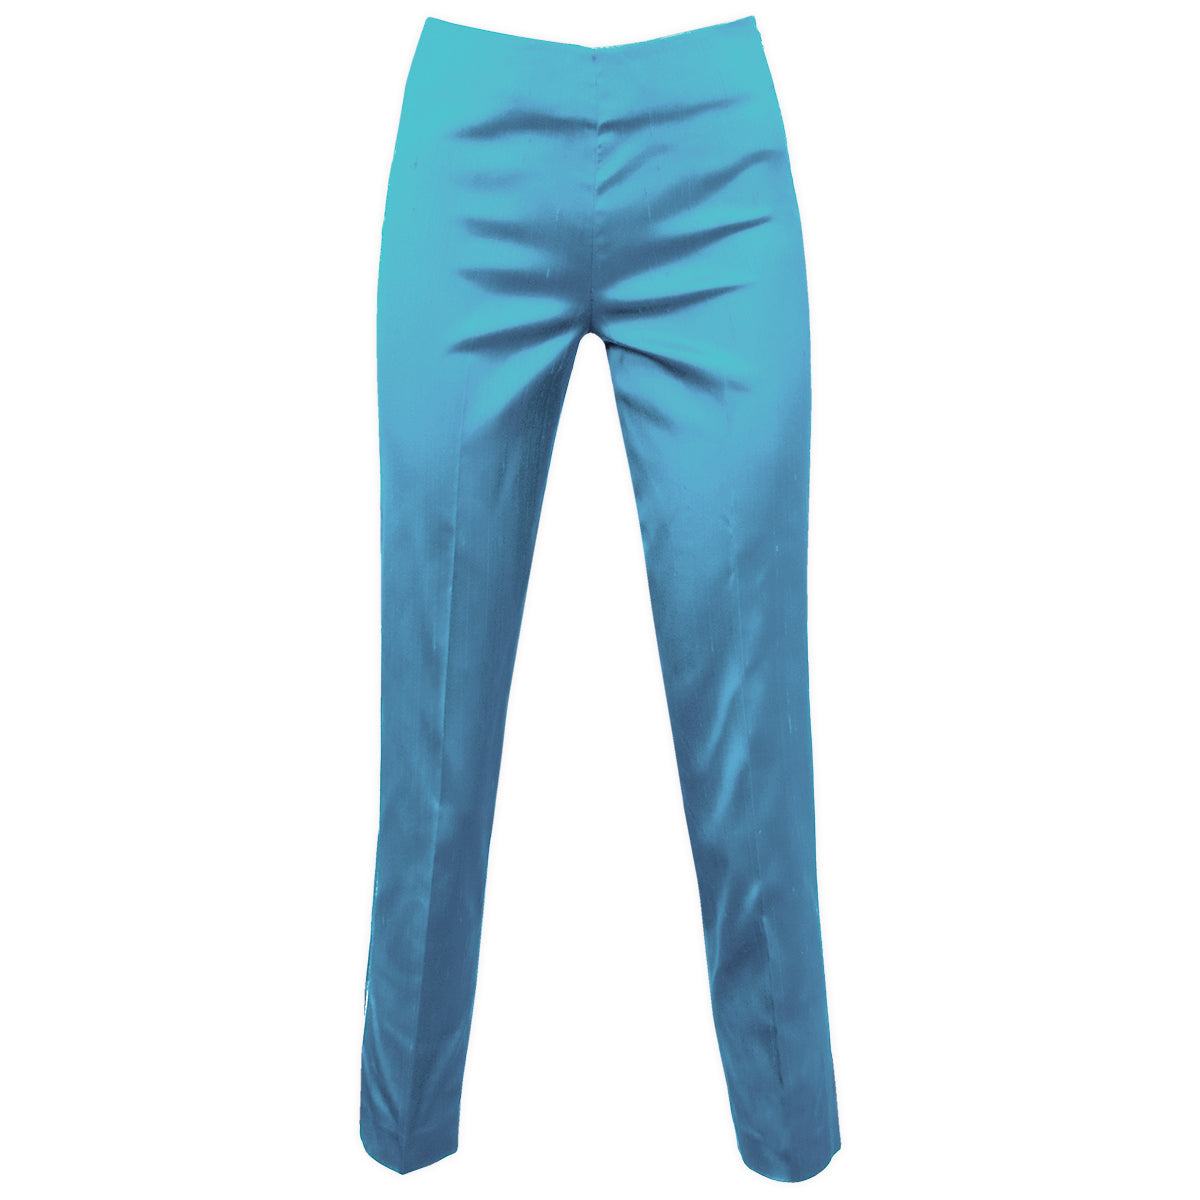 Express | Stylist Super High Waisted Pleated Ankle Pant in Deep Sky Blue |  Express Style Trial